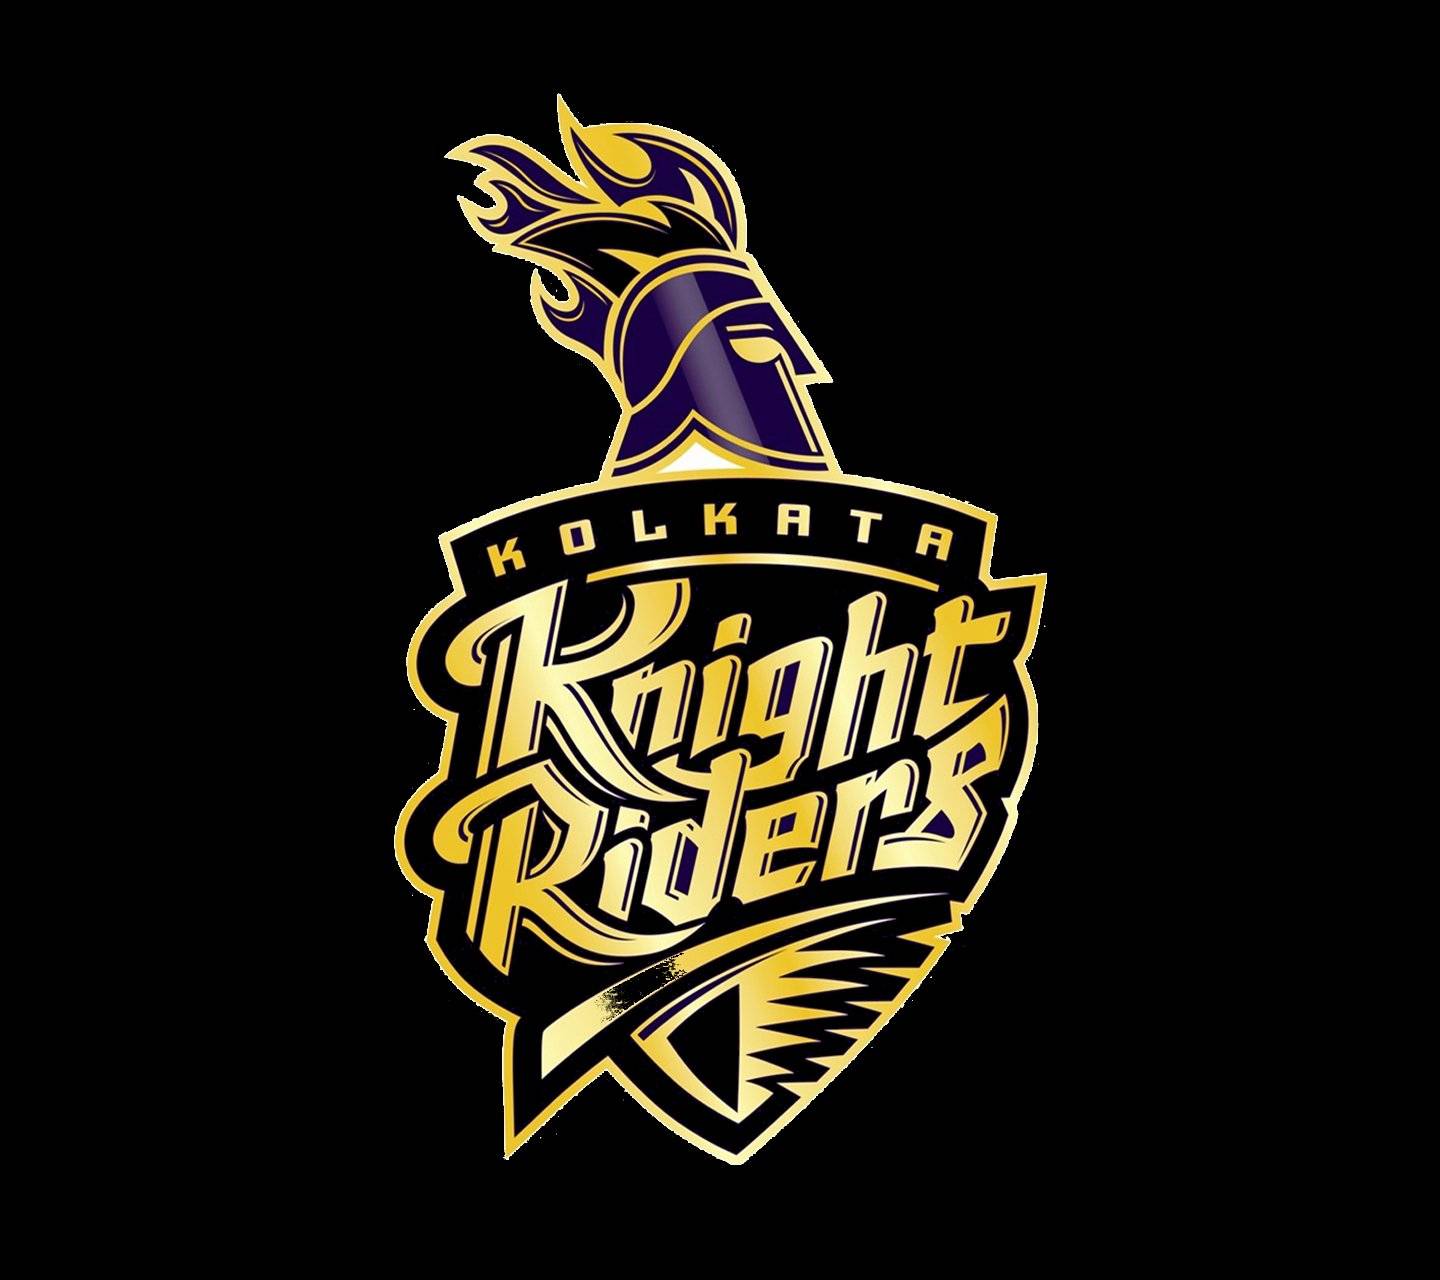 Download free kkr wallpapers for your mobile phone